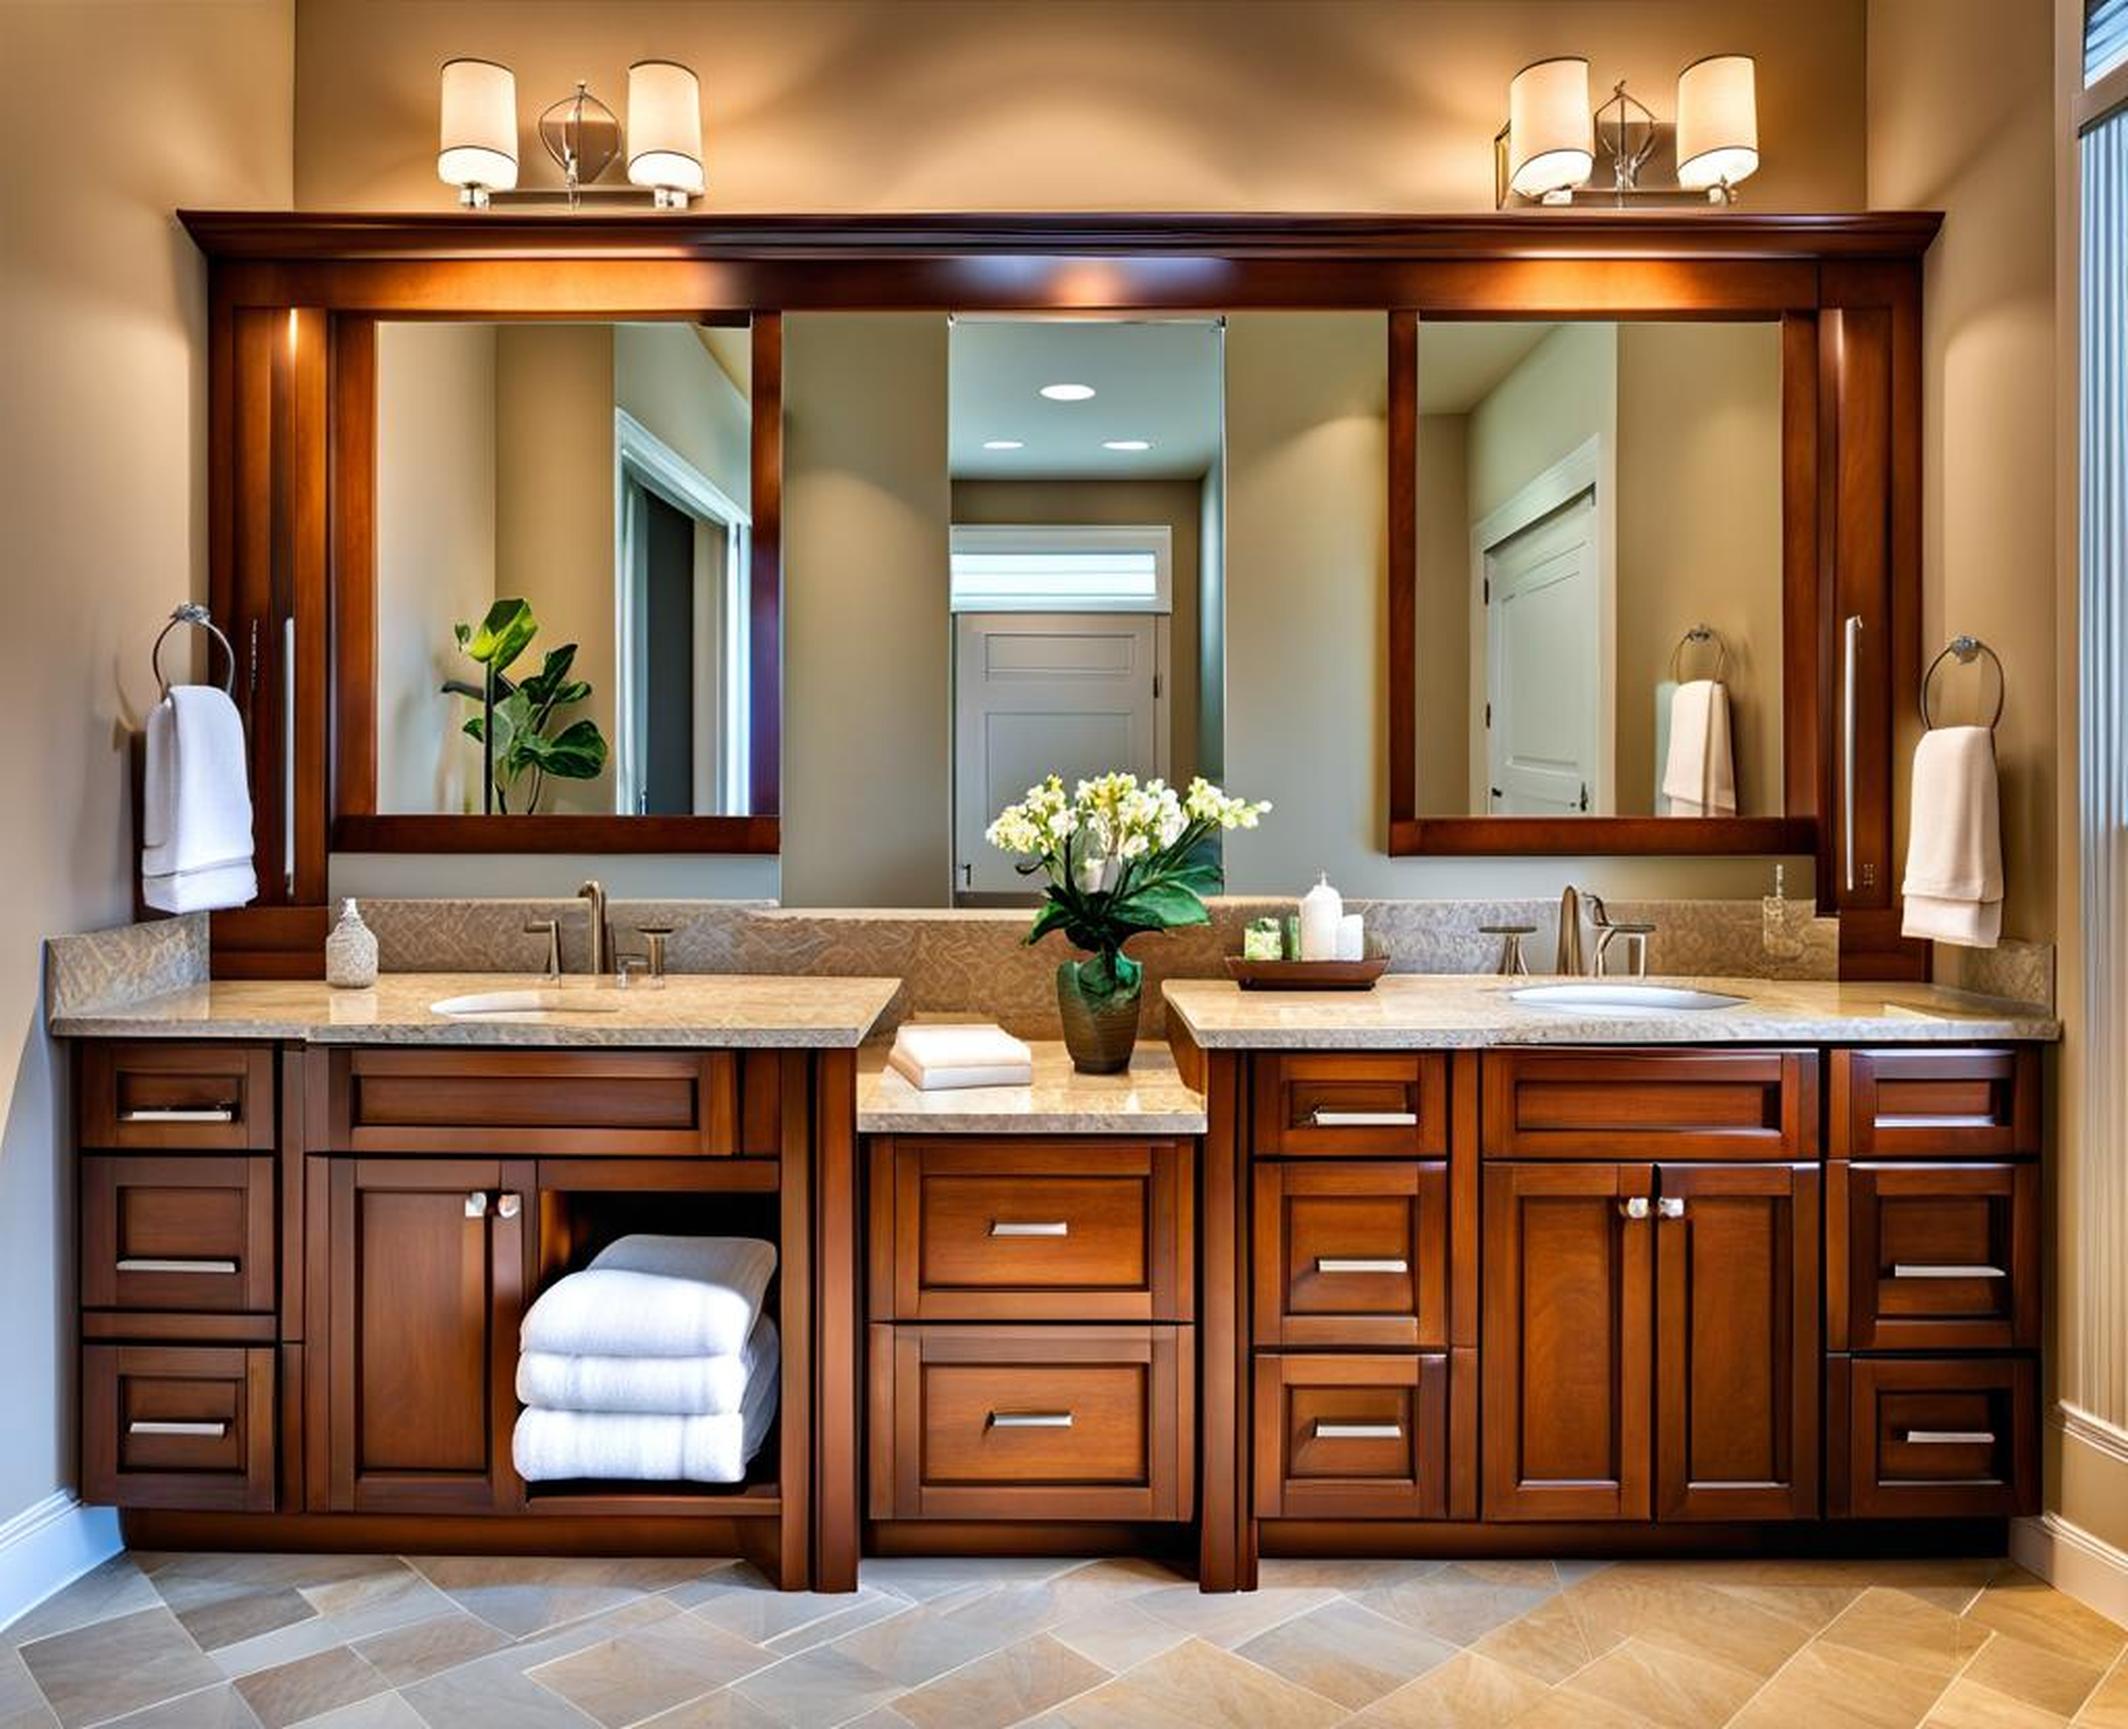 Sit Pretty with These Brilliant Bathroom Vanity Seating Concepts